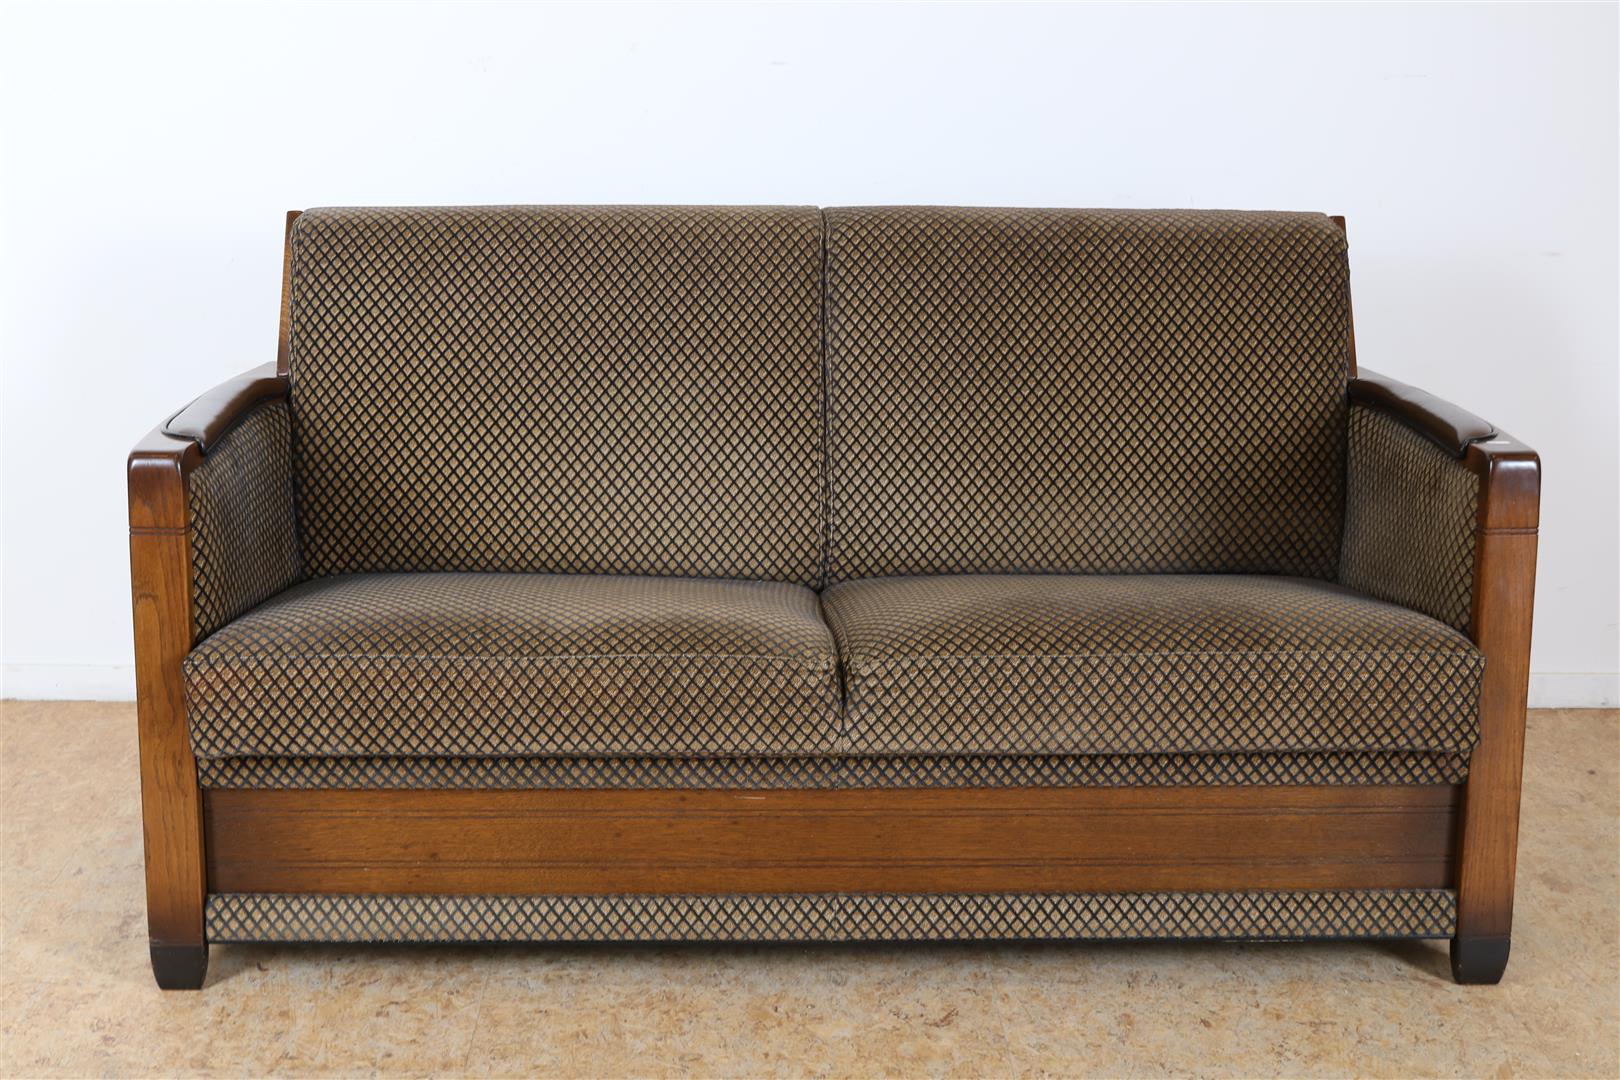 Oak Schuitema 2 person sofa with brown checked fabric upholstery, 82 x 160 x 70 cm.